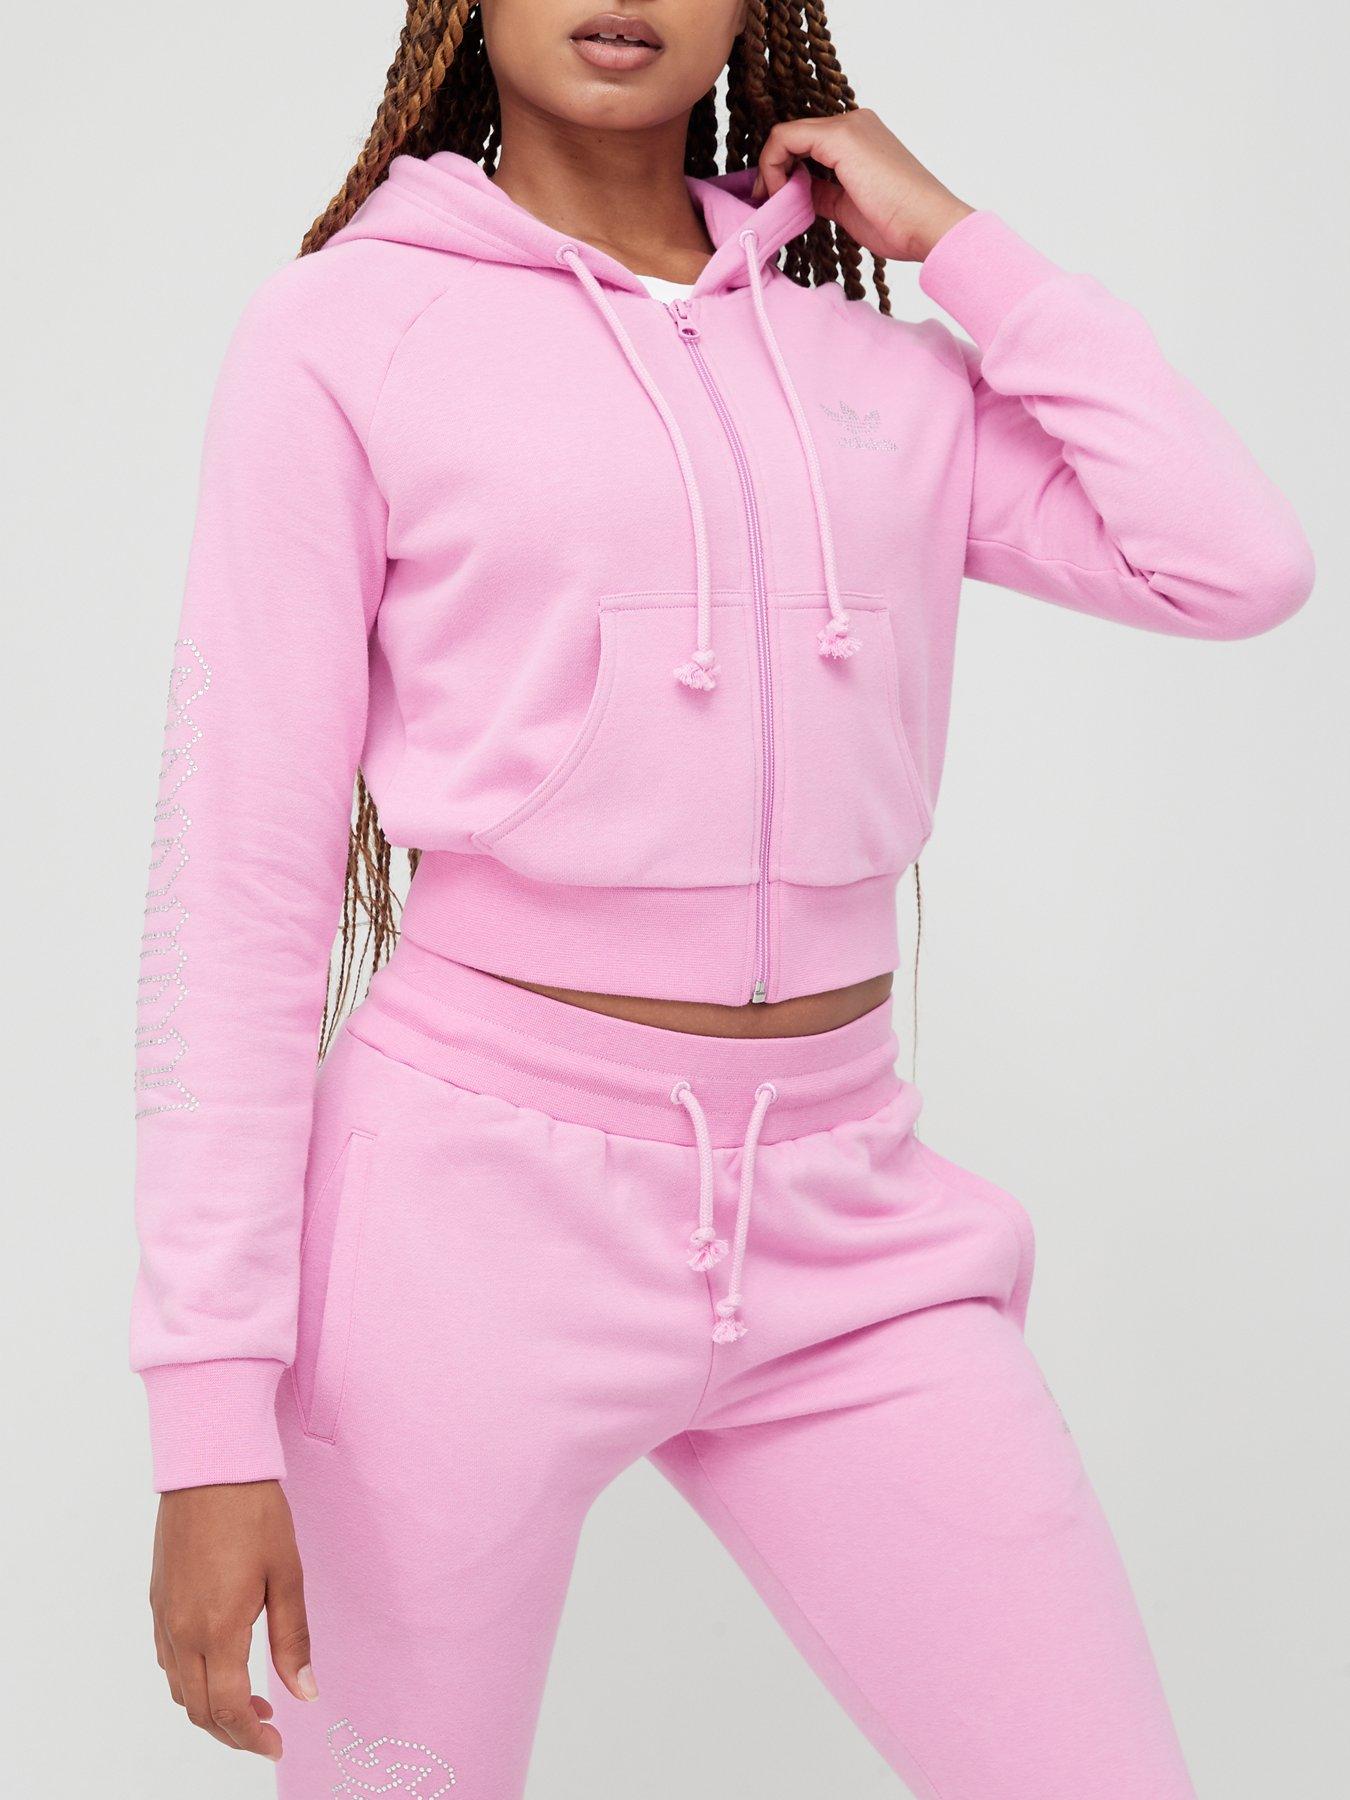 Coats & Jackets Early 2000s Cropped Track Top - Pink